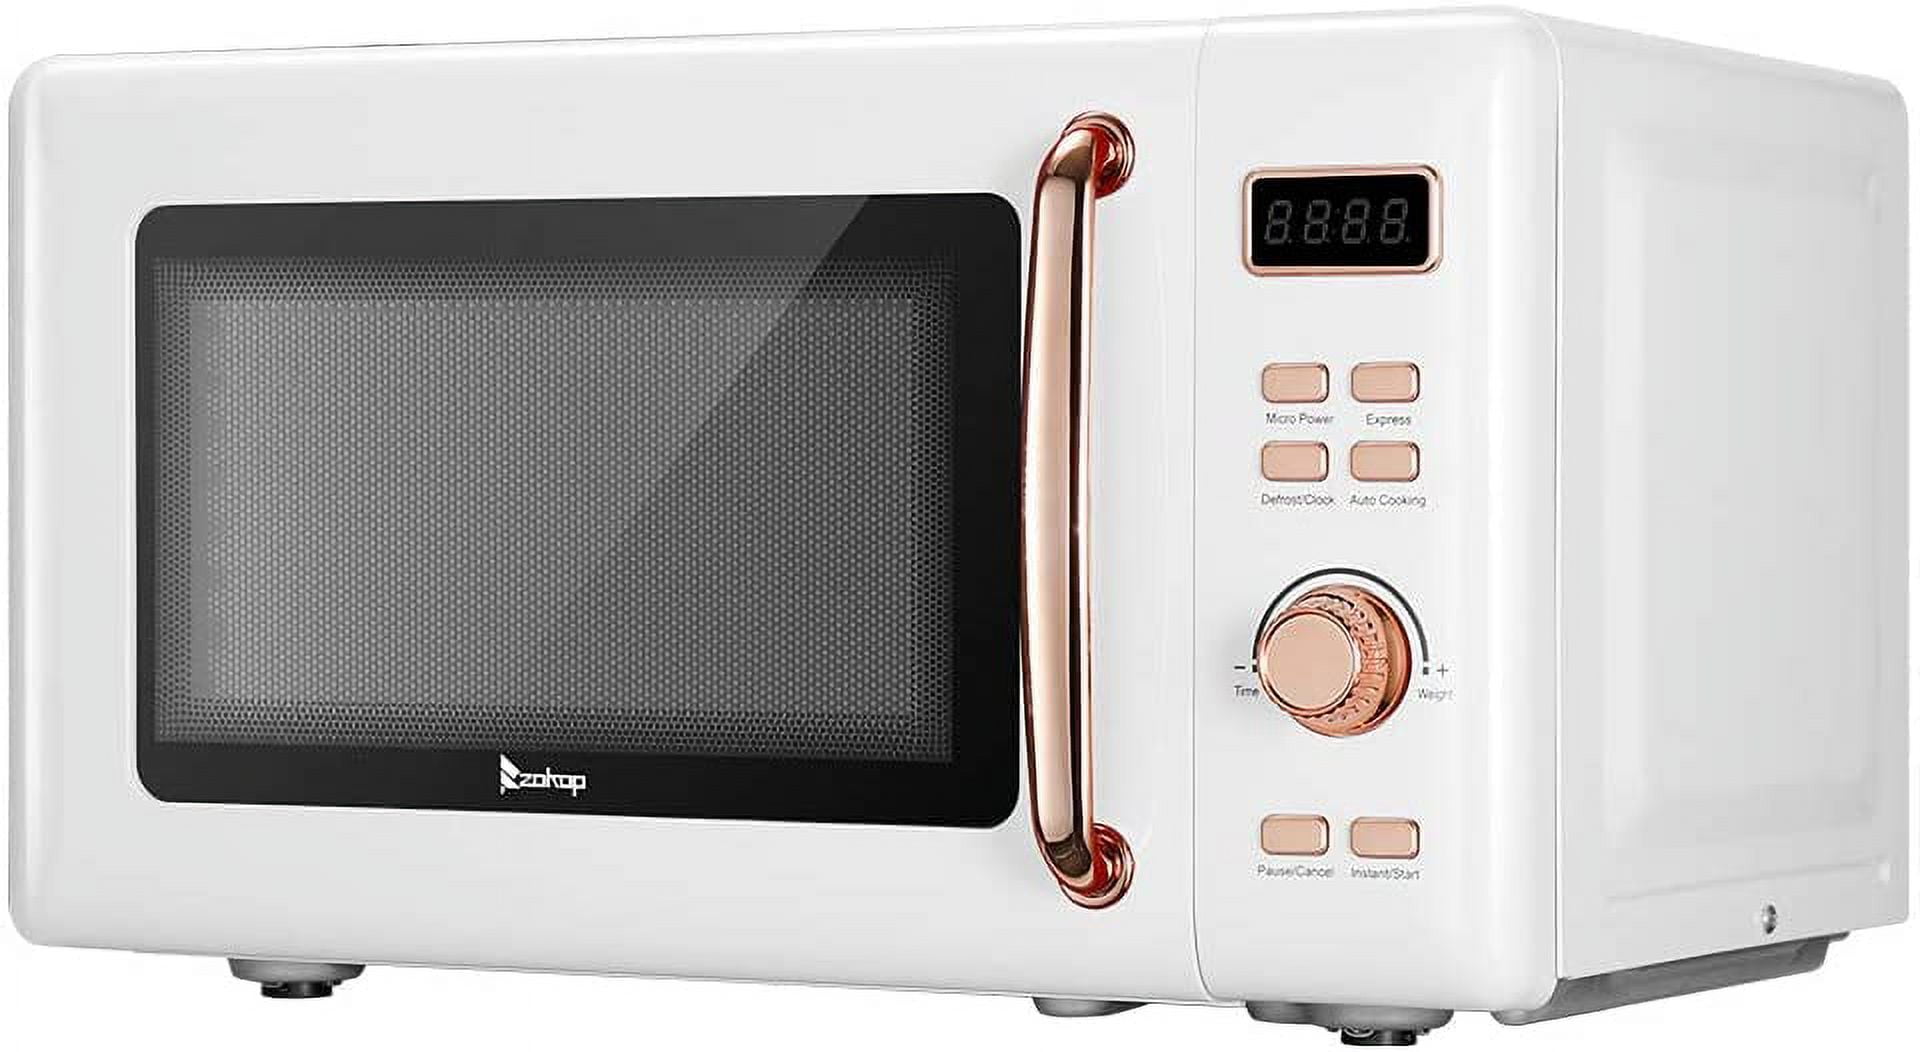 COMFEE CMO-C20M1WB Countertop Microwave Oven with 11 power levels, Fast  Multi-stage Cooking, Turntable Reset Function, Speedy Cooking, Weight/Time